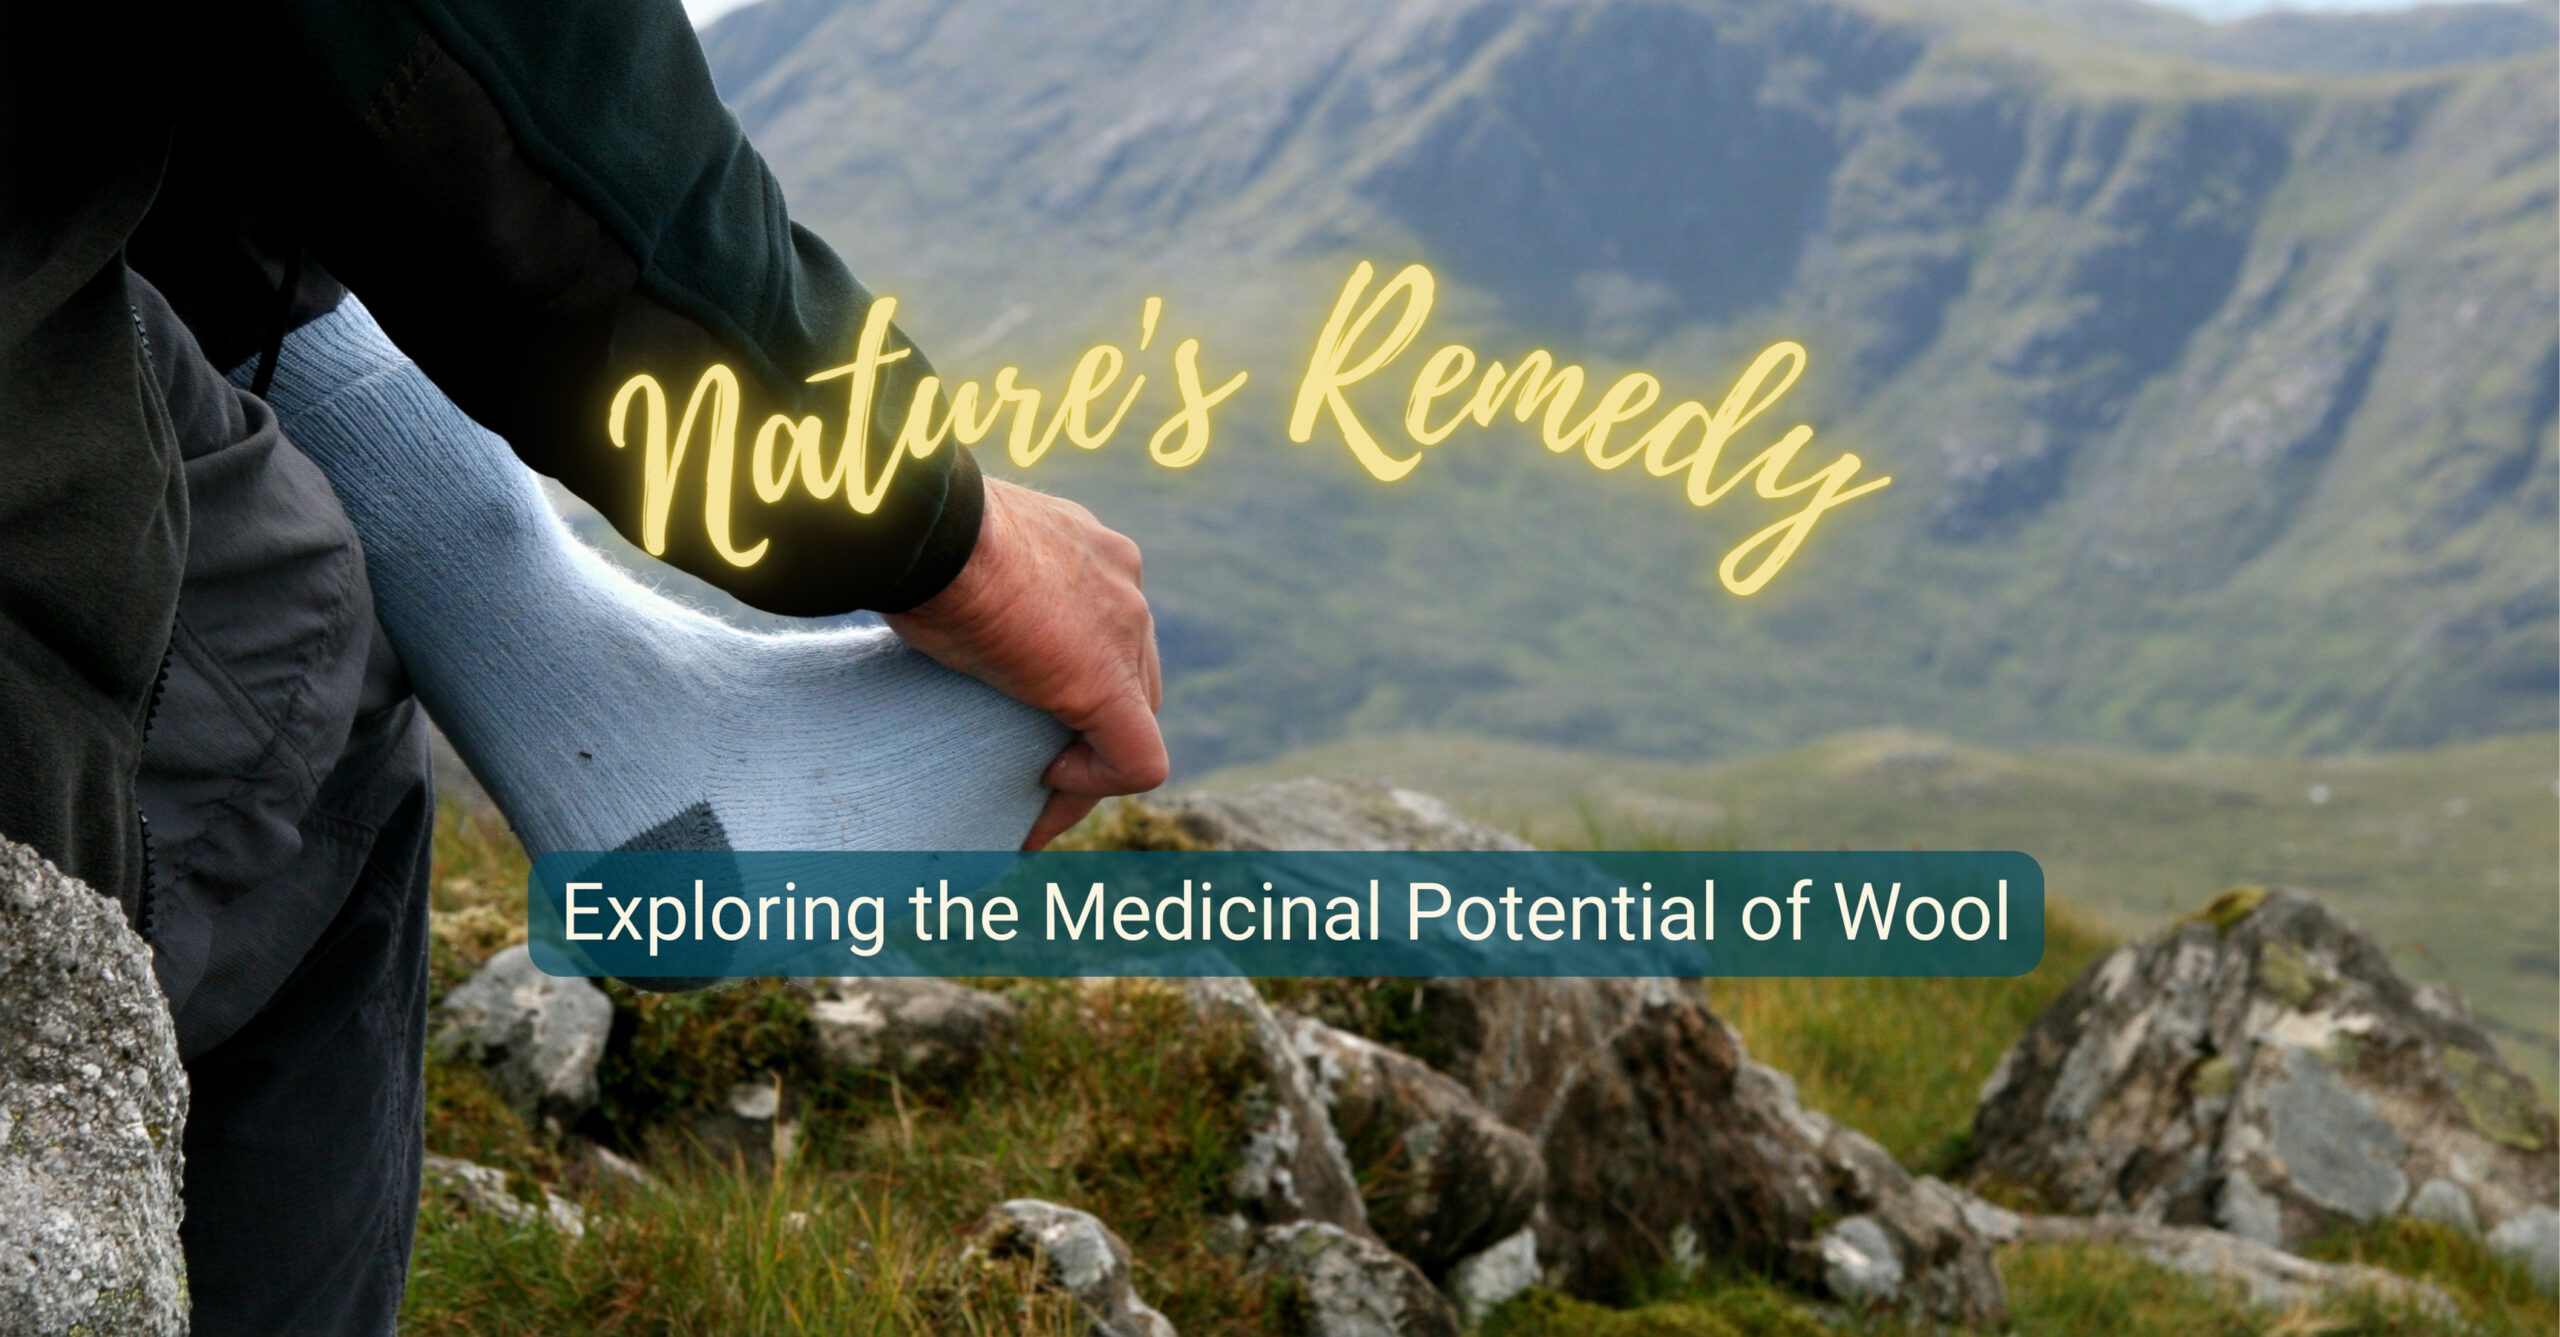 Nature's Remedy: Exploring the Medicinal Potential of Wool 4